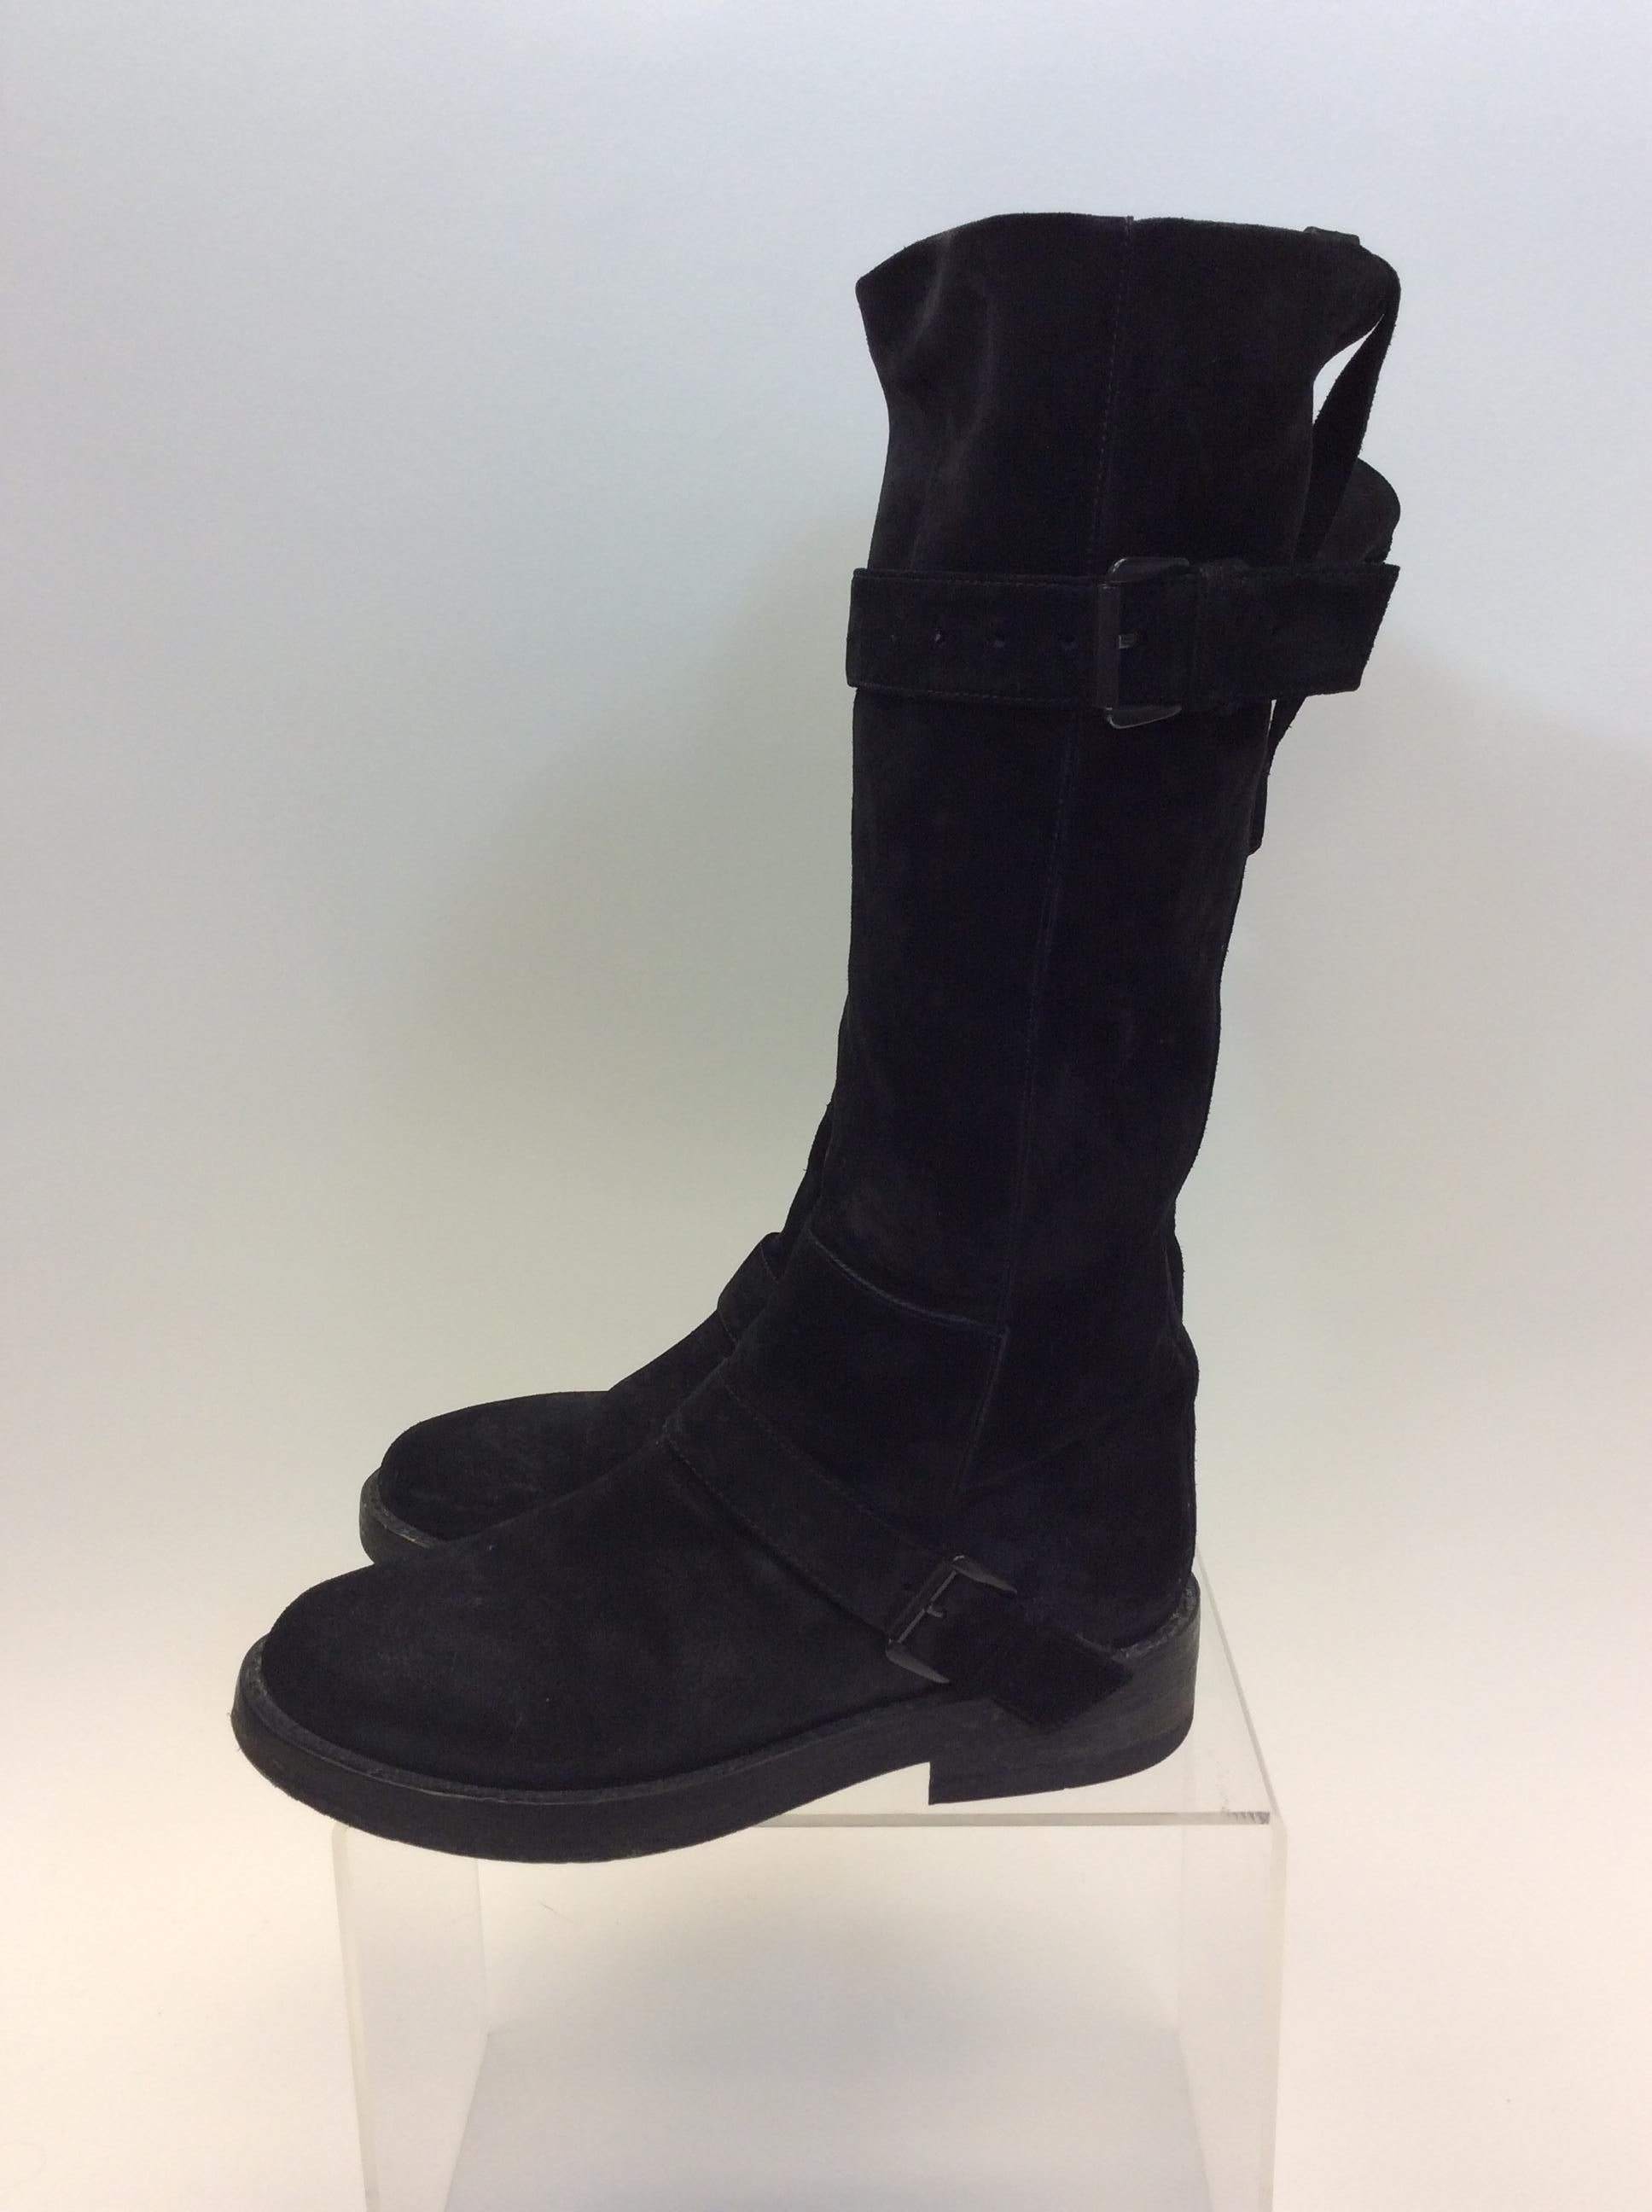 Ann Demeulemeester Black Suede Knee-High Boots
$499
Made in Italy
Suede
Size 37.5
1.5